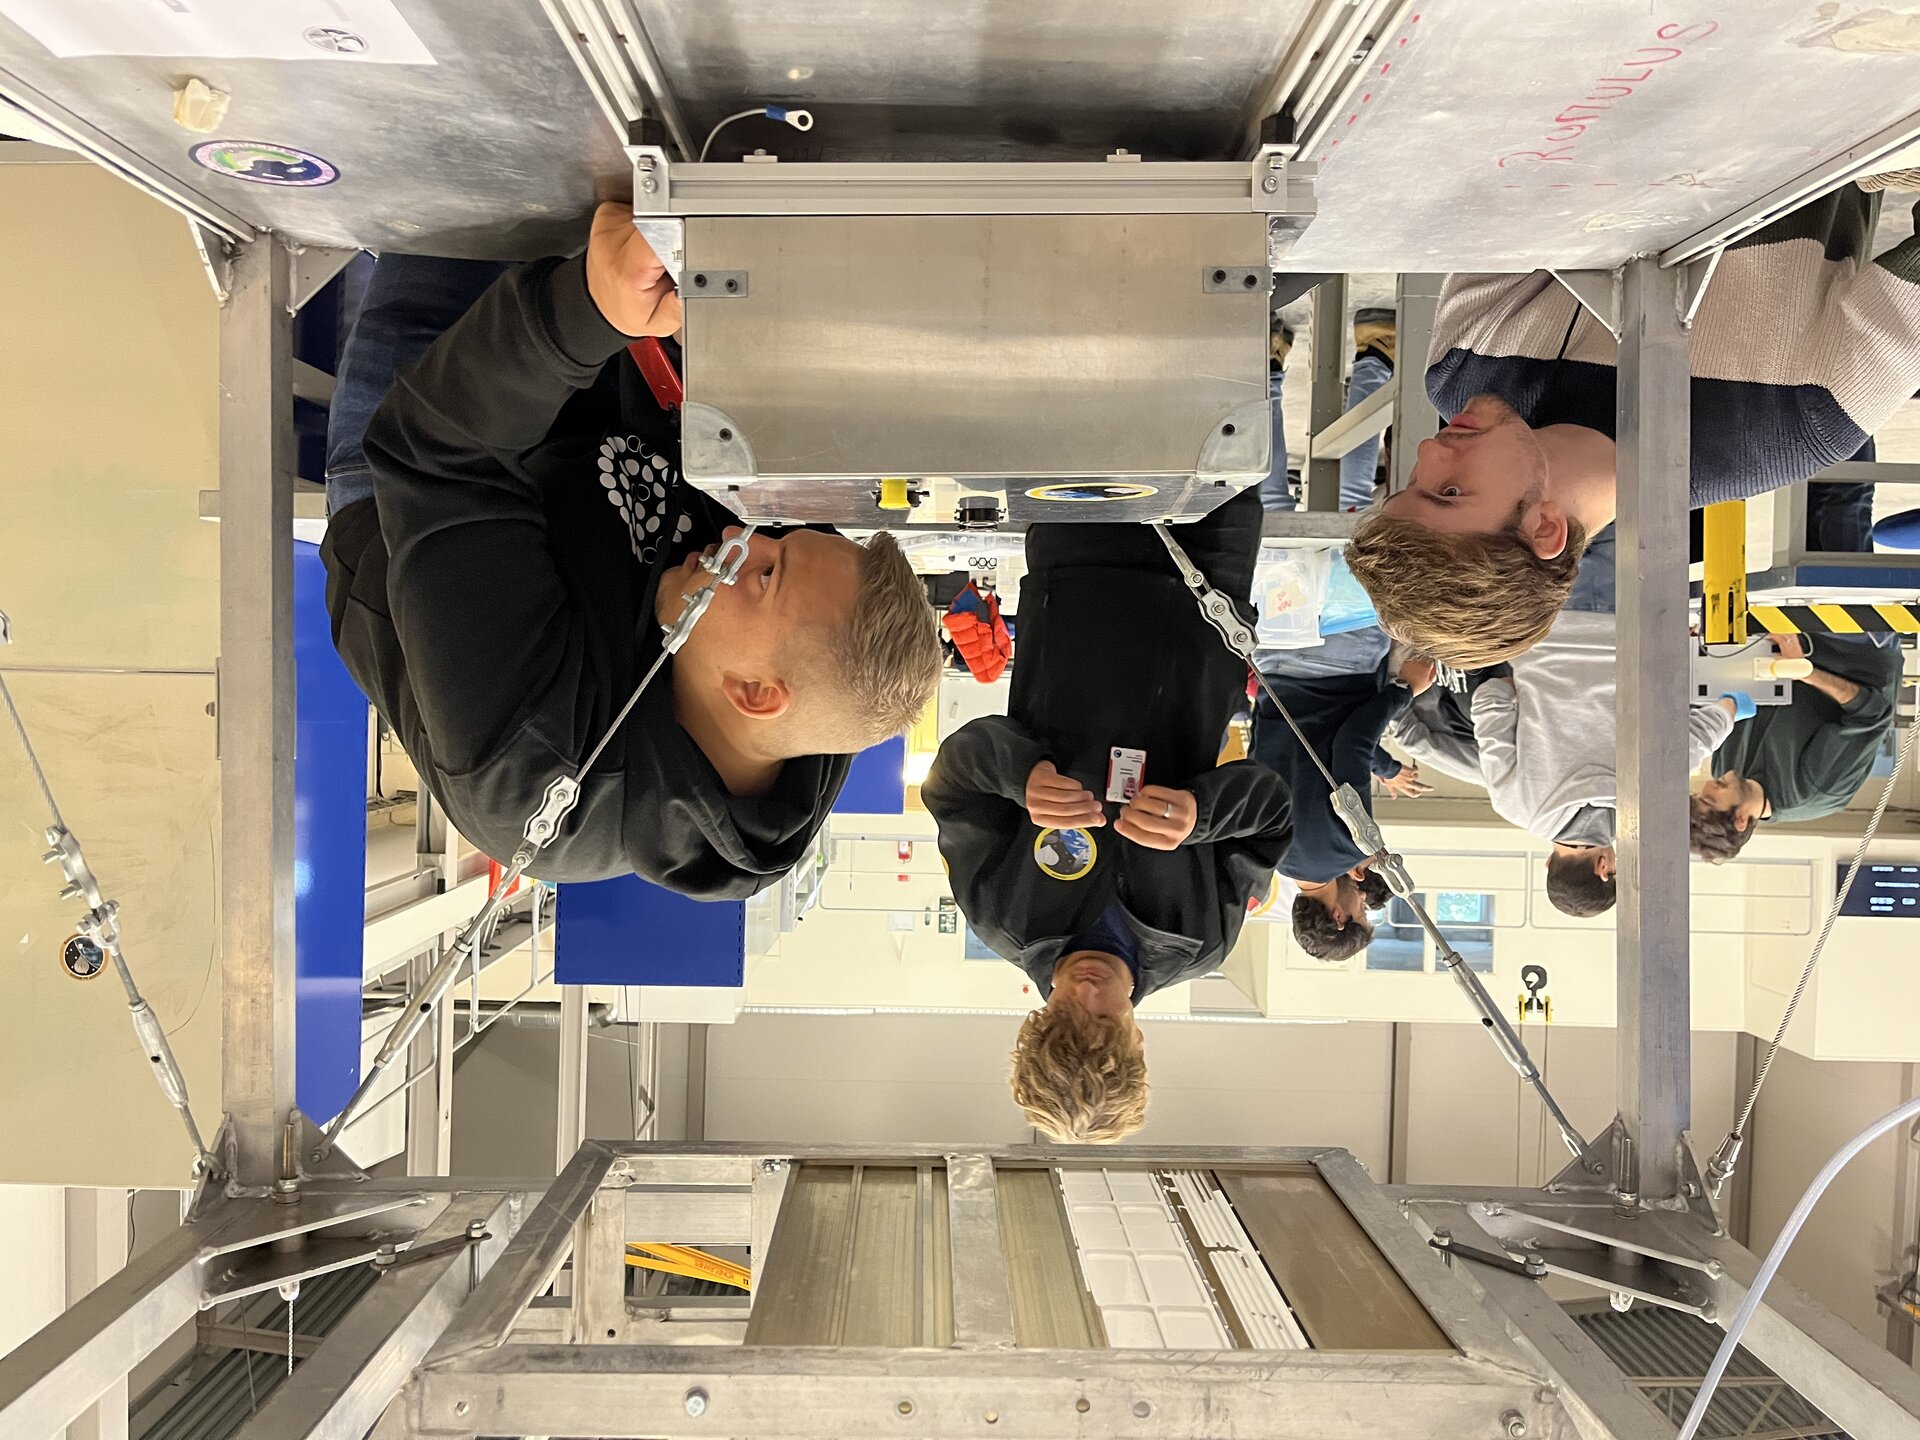 HERMES team installing their experiment on the gondola of BX32